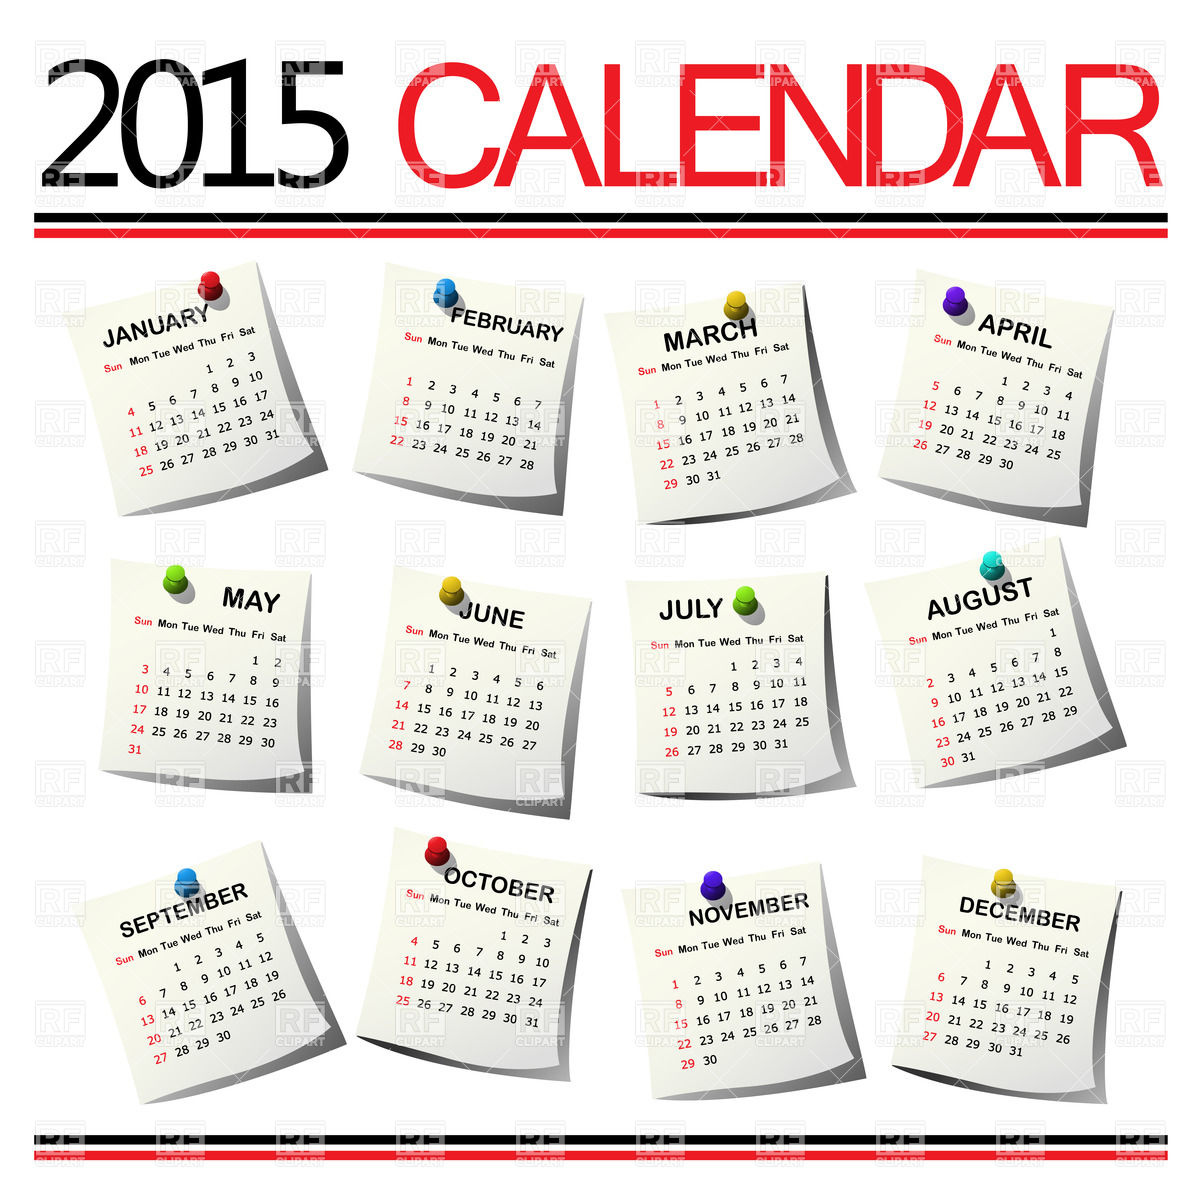 Calendar For 2015 Year For All Months Calendars Layouts Download